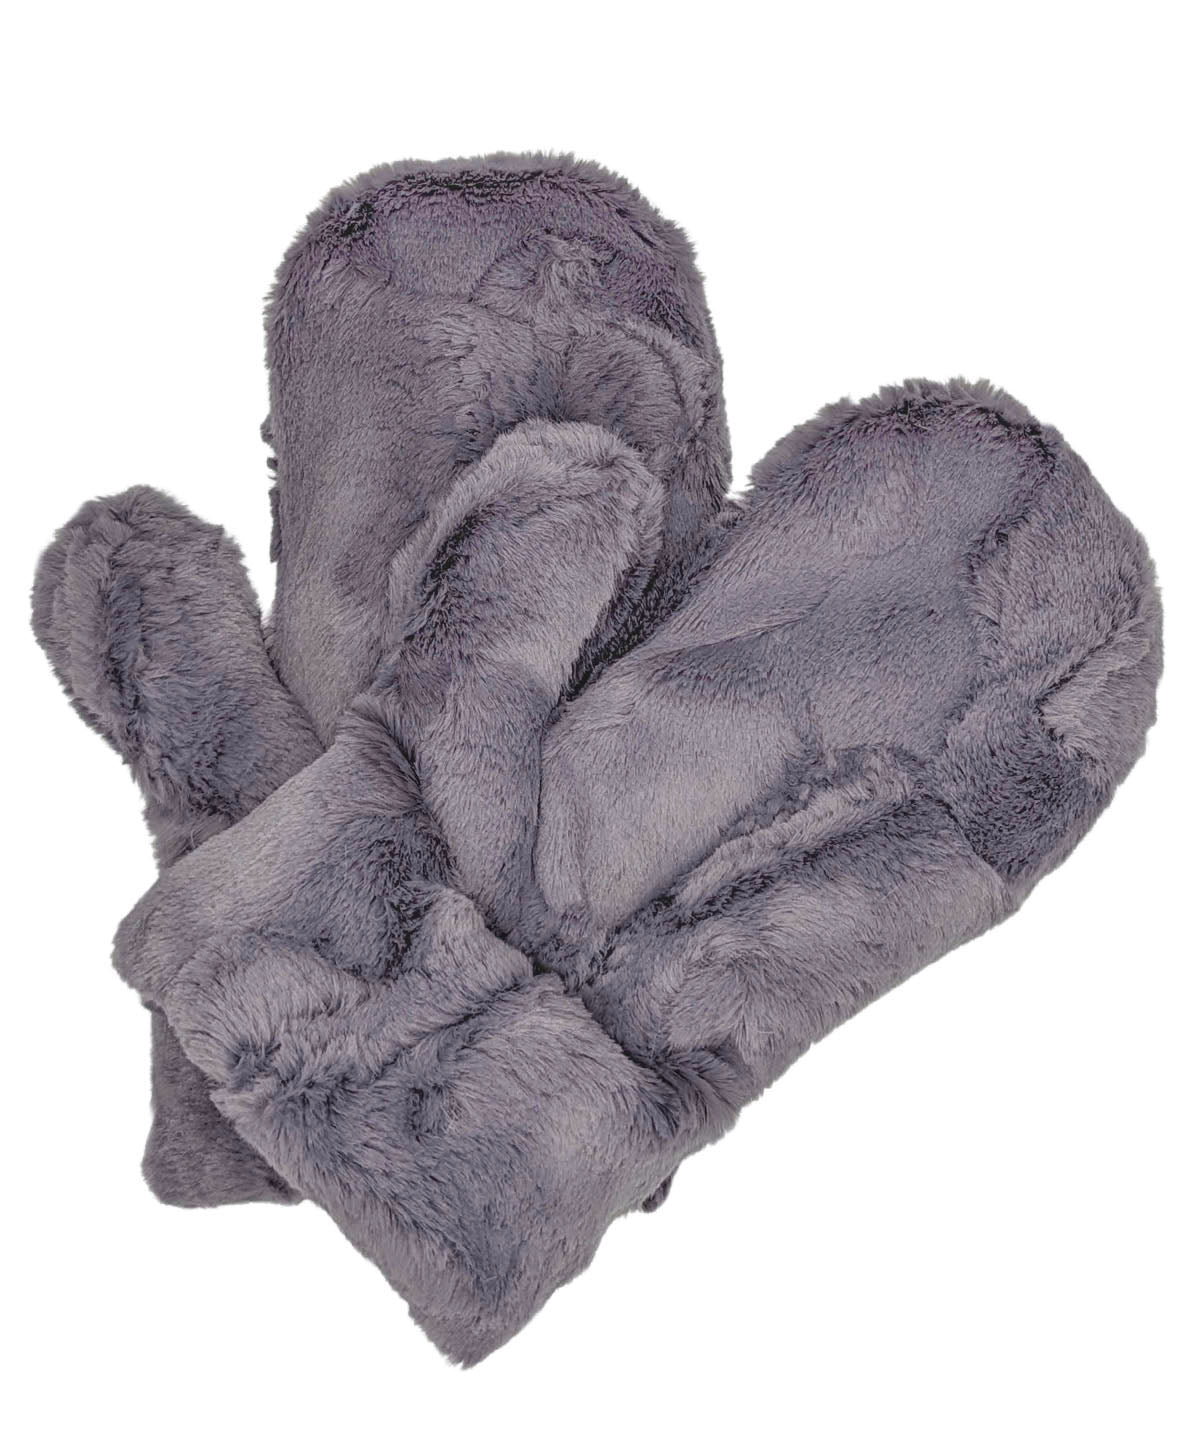 Mittens | Cuddly Faux Fur in Cool Gray | Handmade in the USA bye Pandemonium Seattle